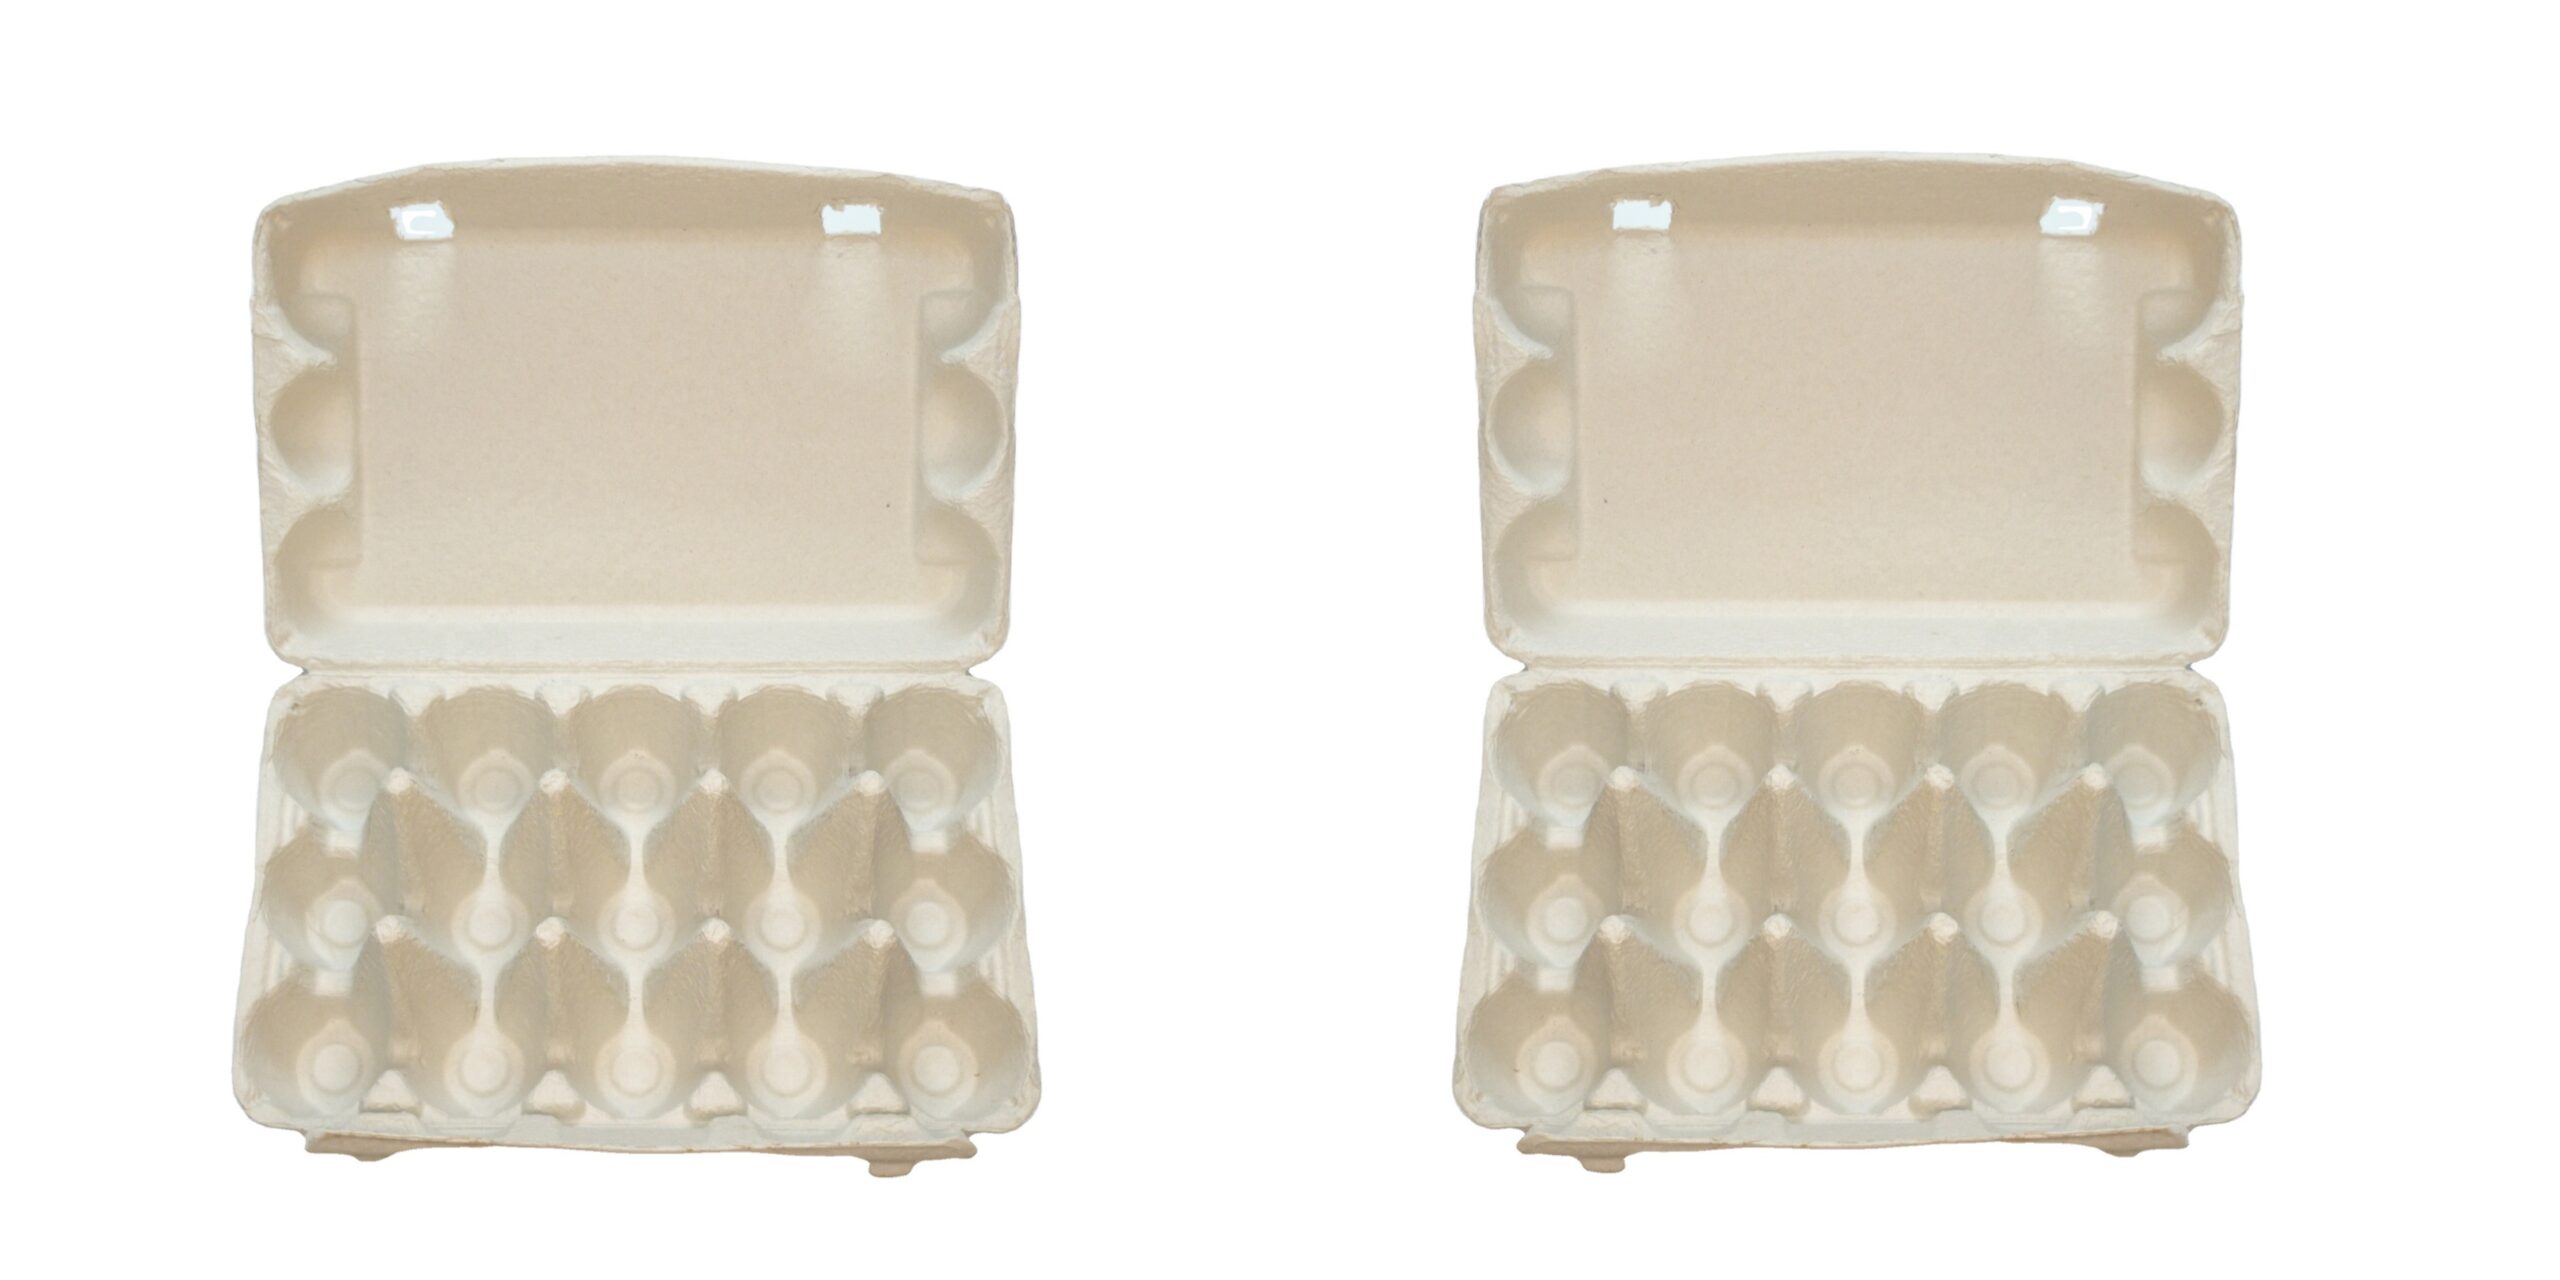 Perfect Egg Cartons For Daily Life